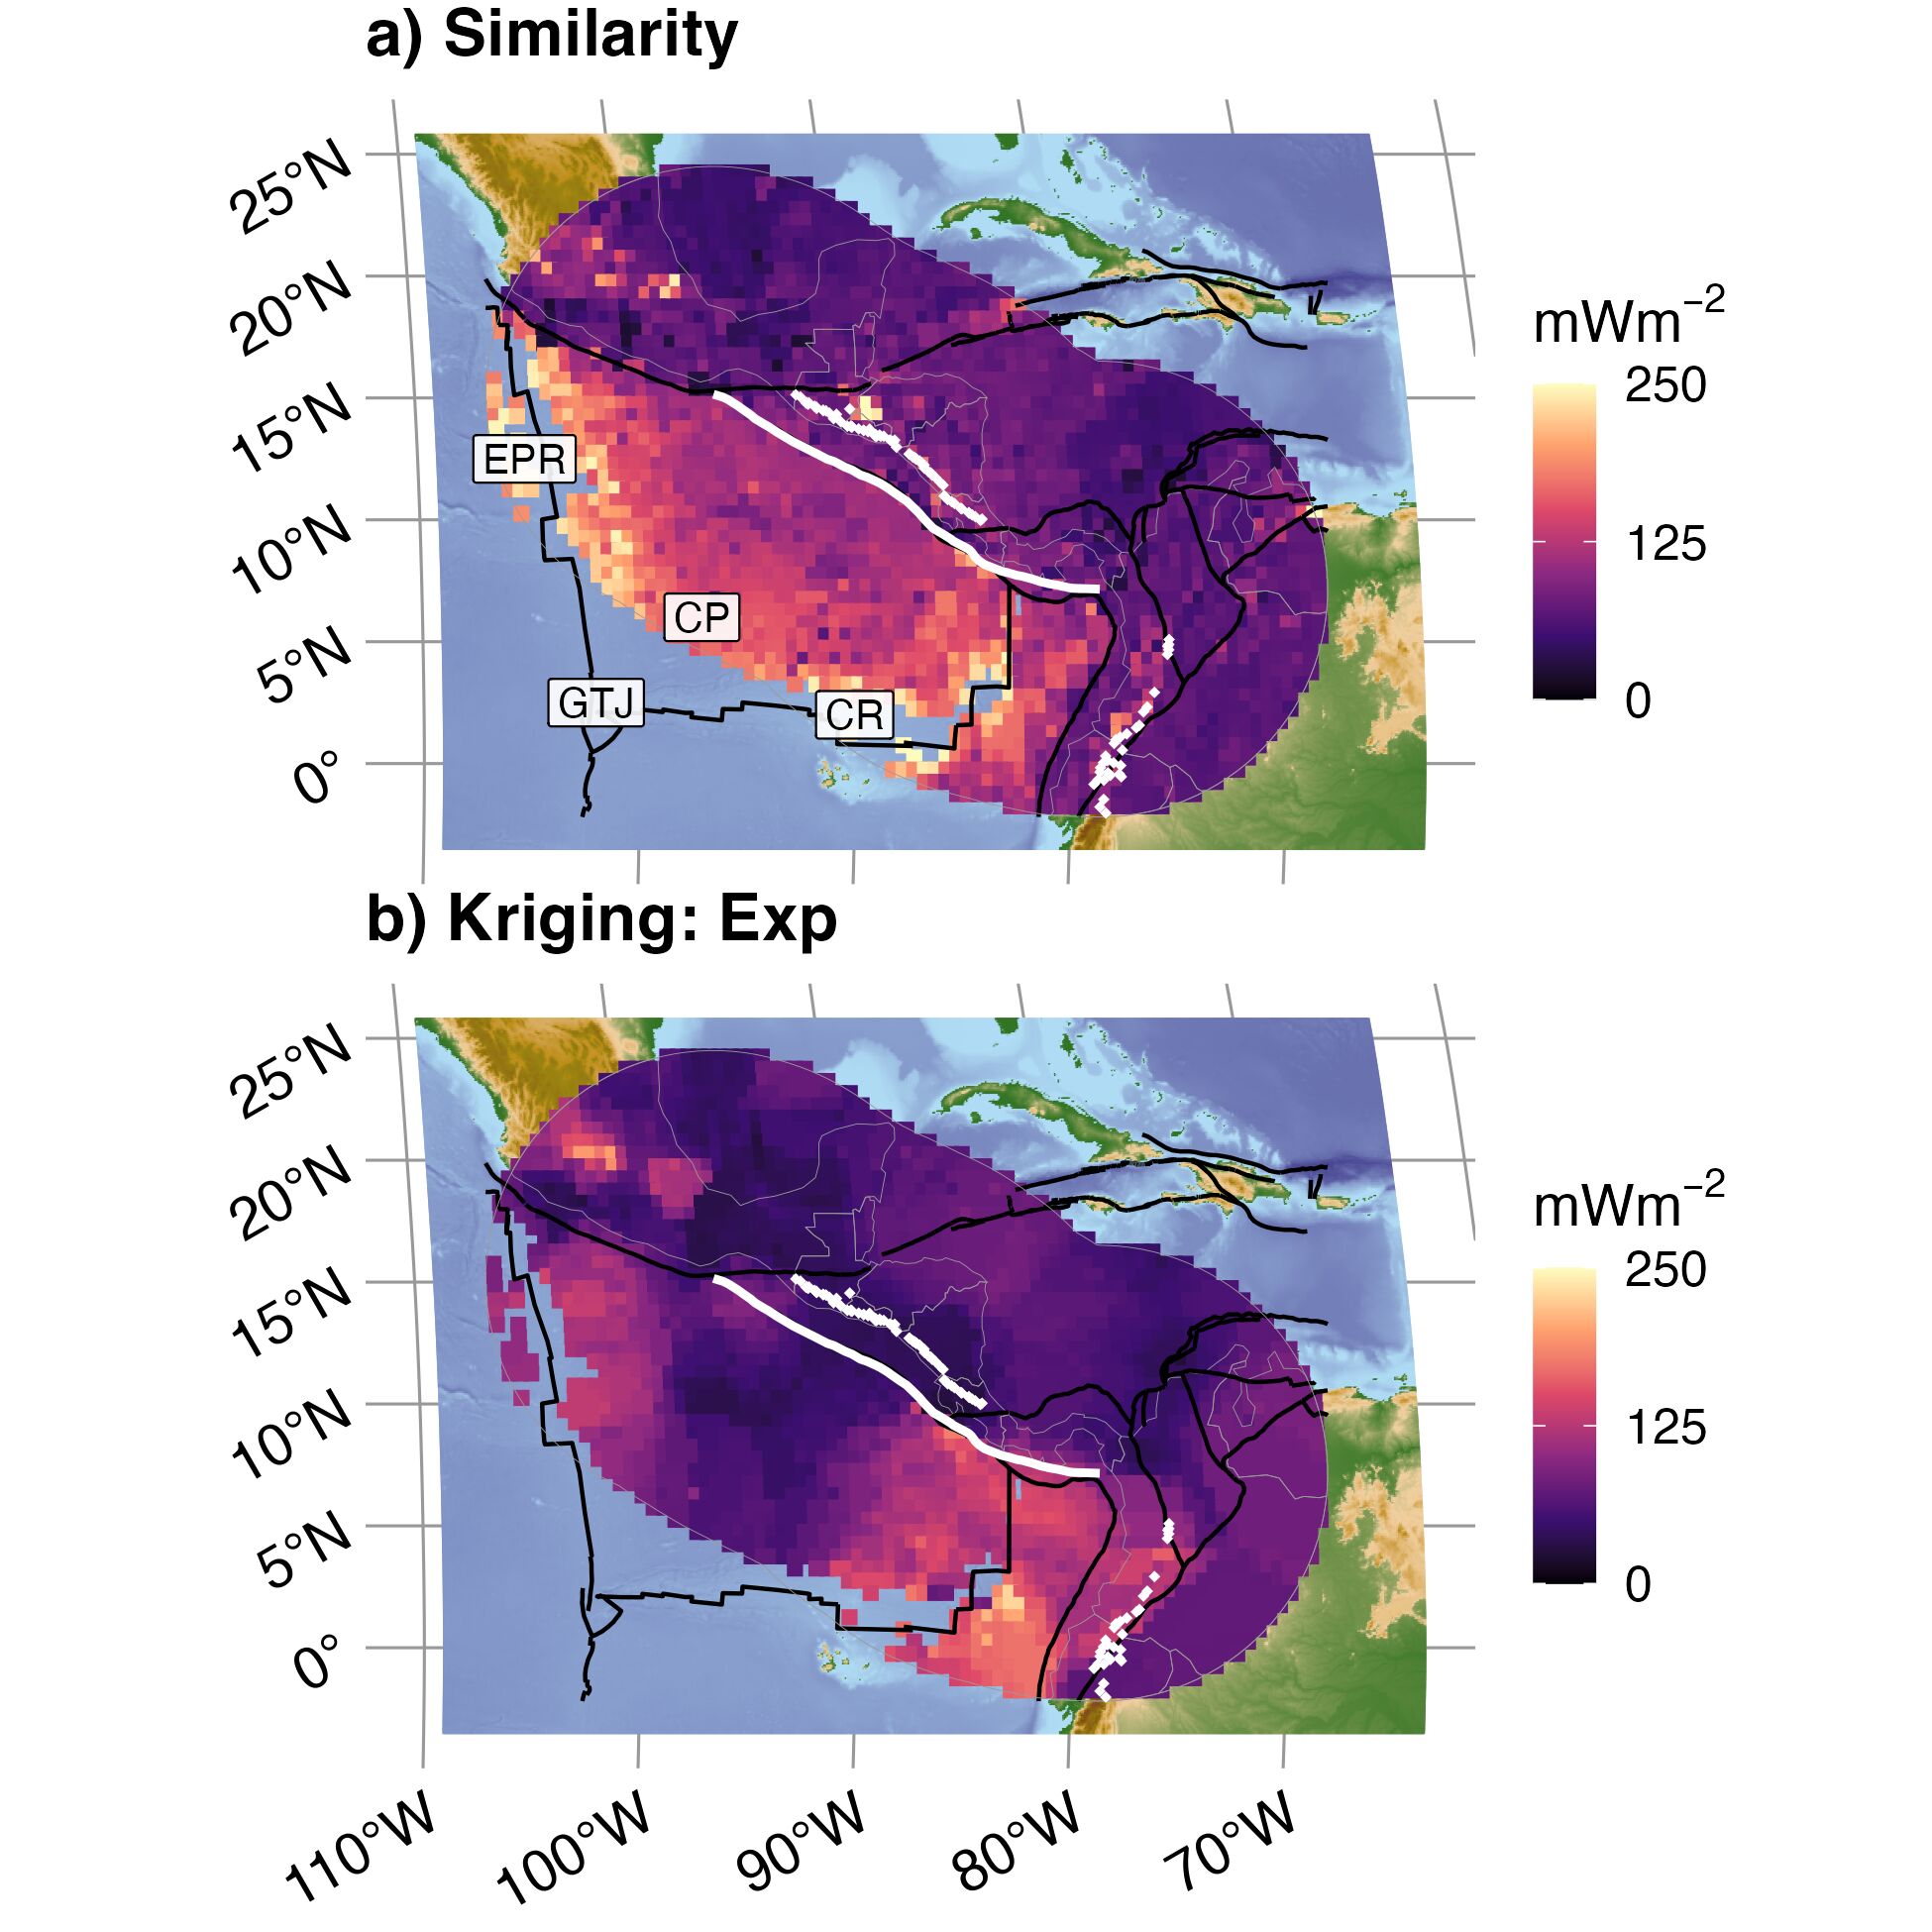 Similarity and Kriging interpolations for Central America. (a) Relatively high surface heat flow is predicted by Similarity within the young Cocos Plate (CP) and along the arms of the Galápagos triple junction (GTJ): the East Pacific Rise (EPR) and Cocos Ridge (CR). In contrast, (b) many anomalously-low surface heat flow observations within the CP (Hutnak et al., 2008) constrain Kriging predictions to low values. Segment boundary (bold white line) and volcanoes (gold diamonds) defined by Syracuse & Abers (2006). Similarity interpolation from Lucazeau (2019). Plate boundaries (bold black lines) defined by Lawver et al. (2018).